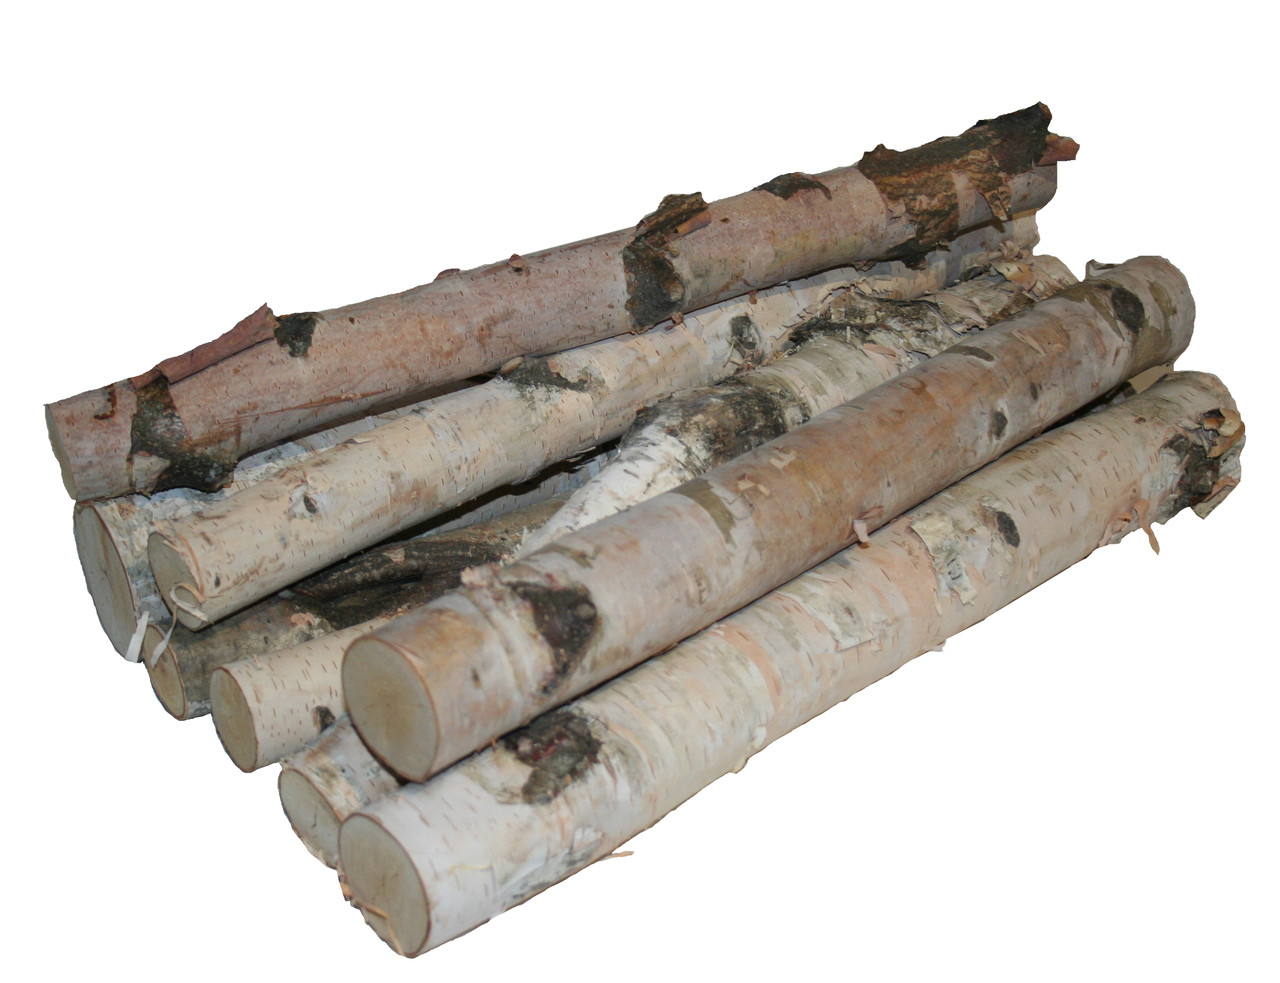 Wilson Decorative White Birch Logs, Natural Bark Wood Home Décor - 17-18  in Length 1.5-4 Dia. (Set of 6)